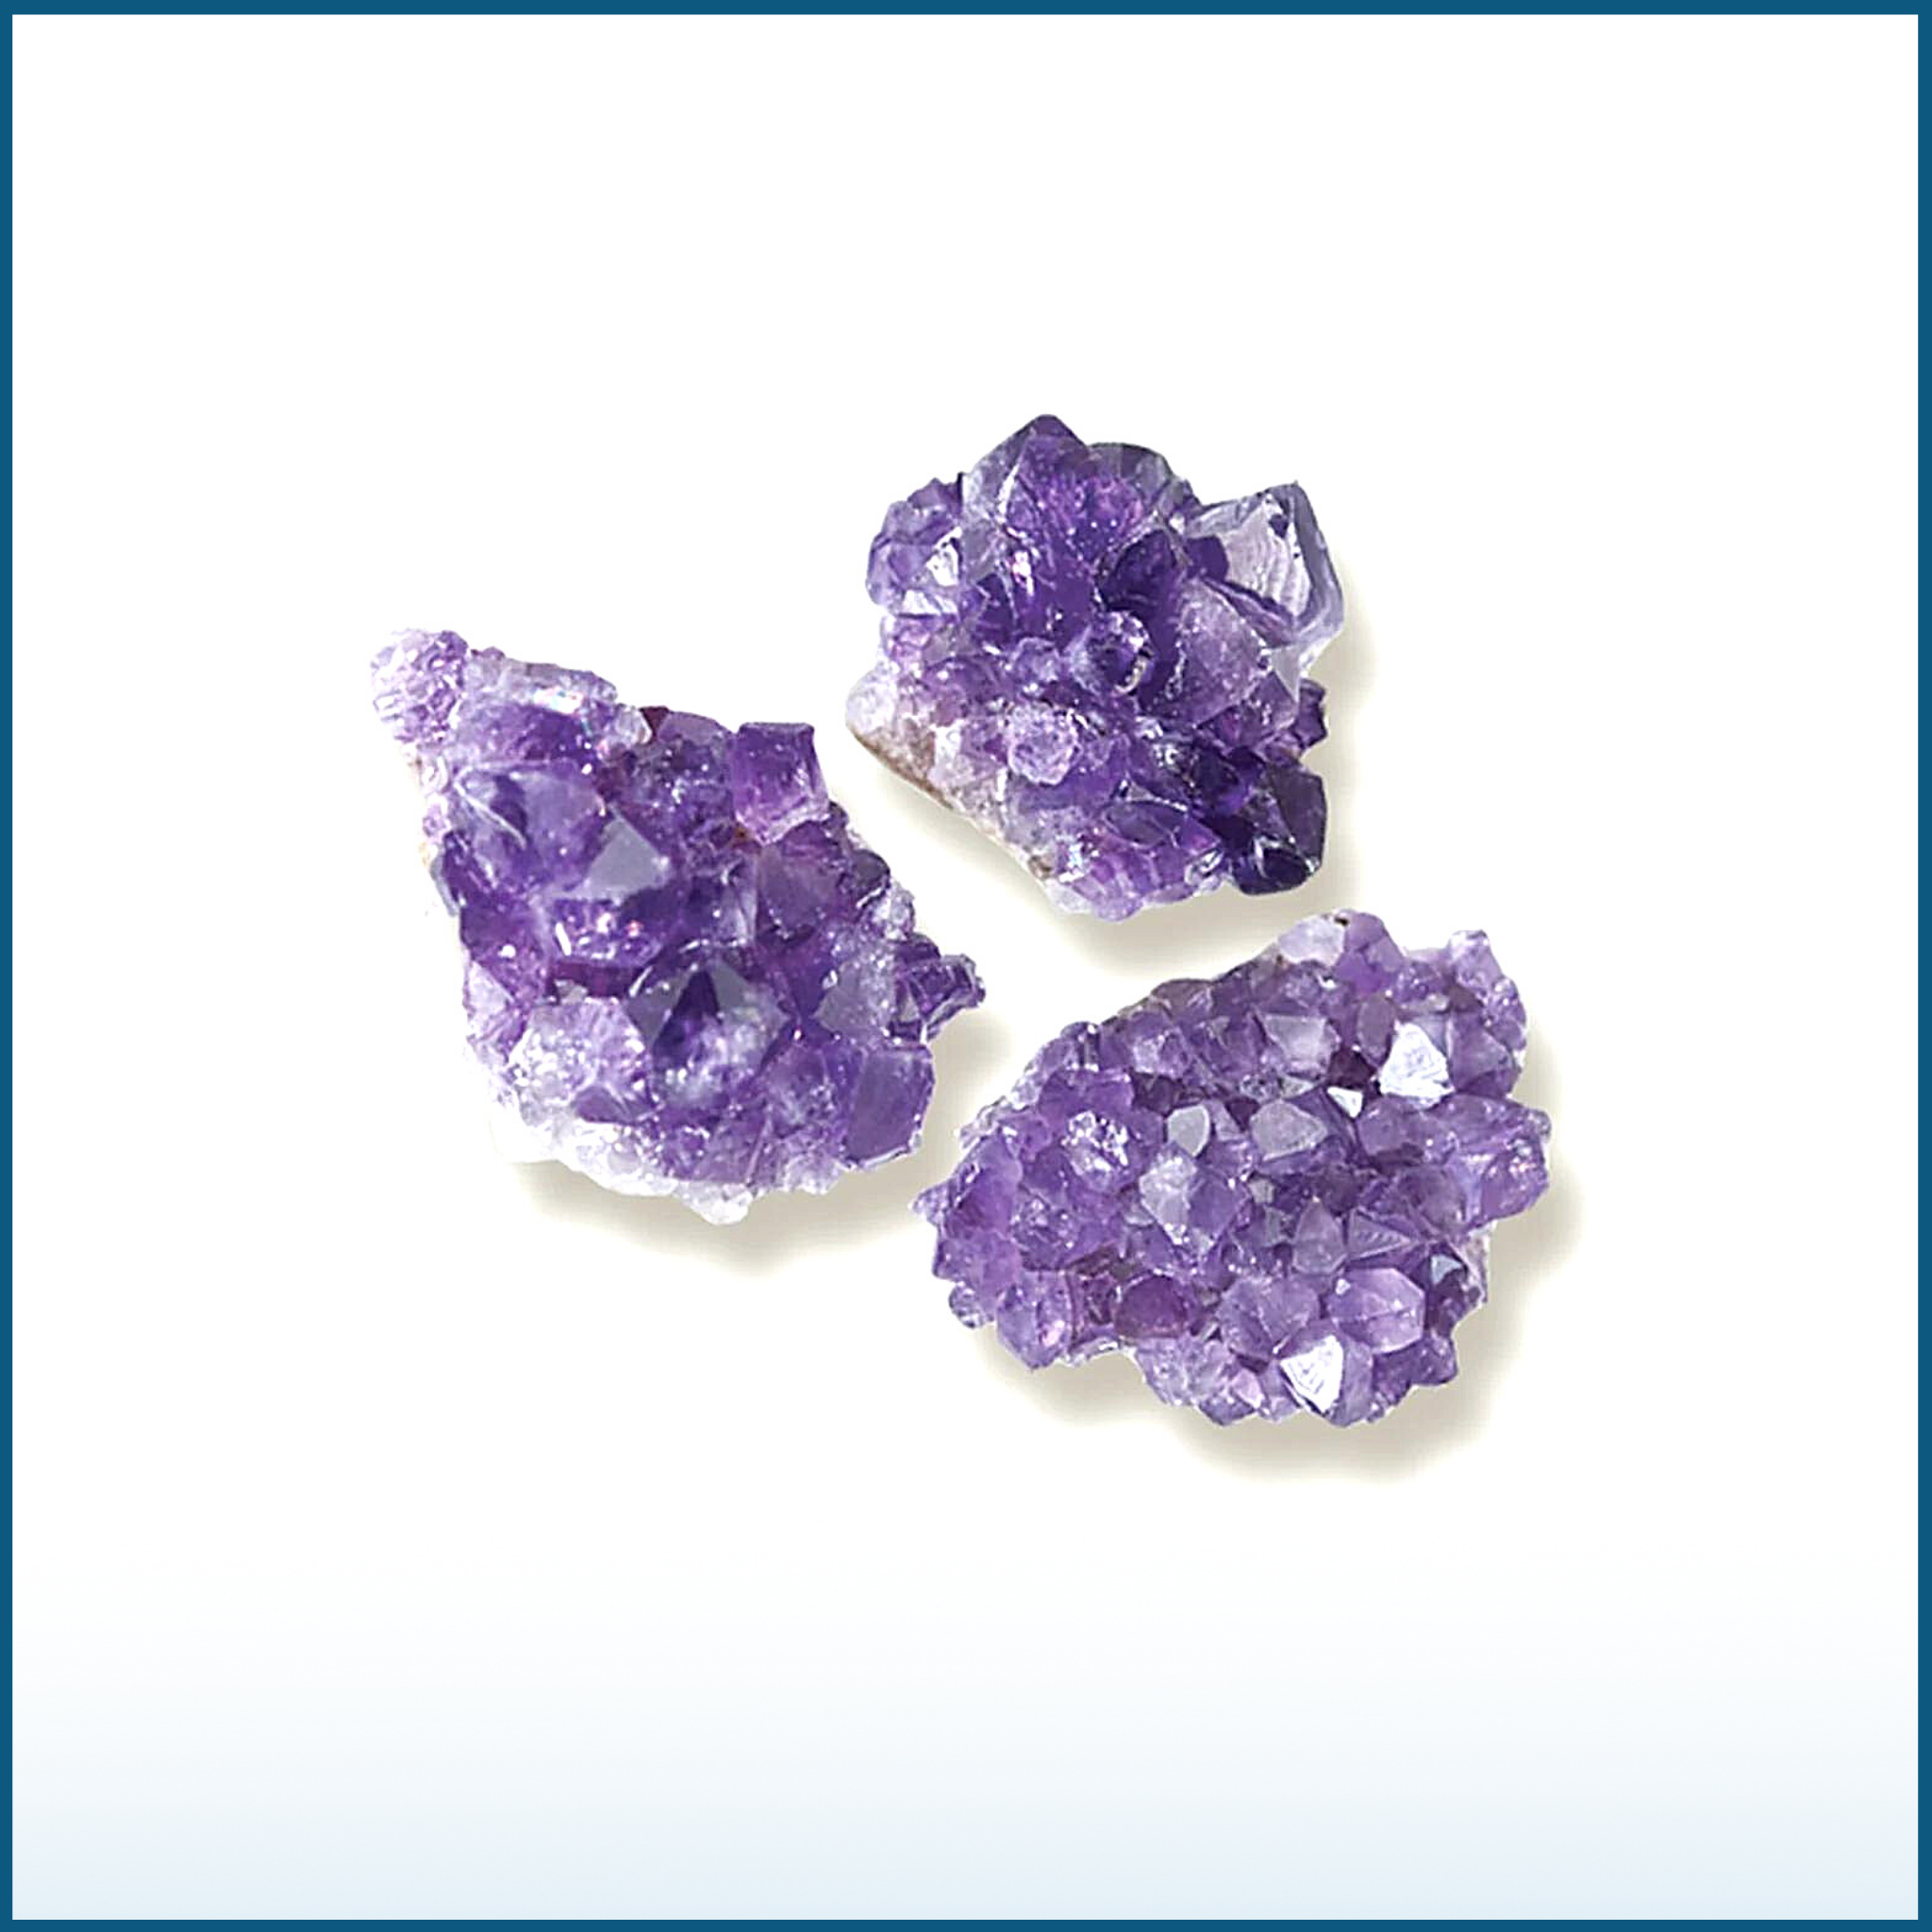 Enhance Your Space with Stunning Amethyst Clusters - Natural Healing Crystals for Positive Energy and Décor-14